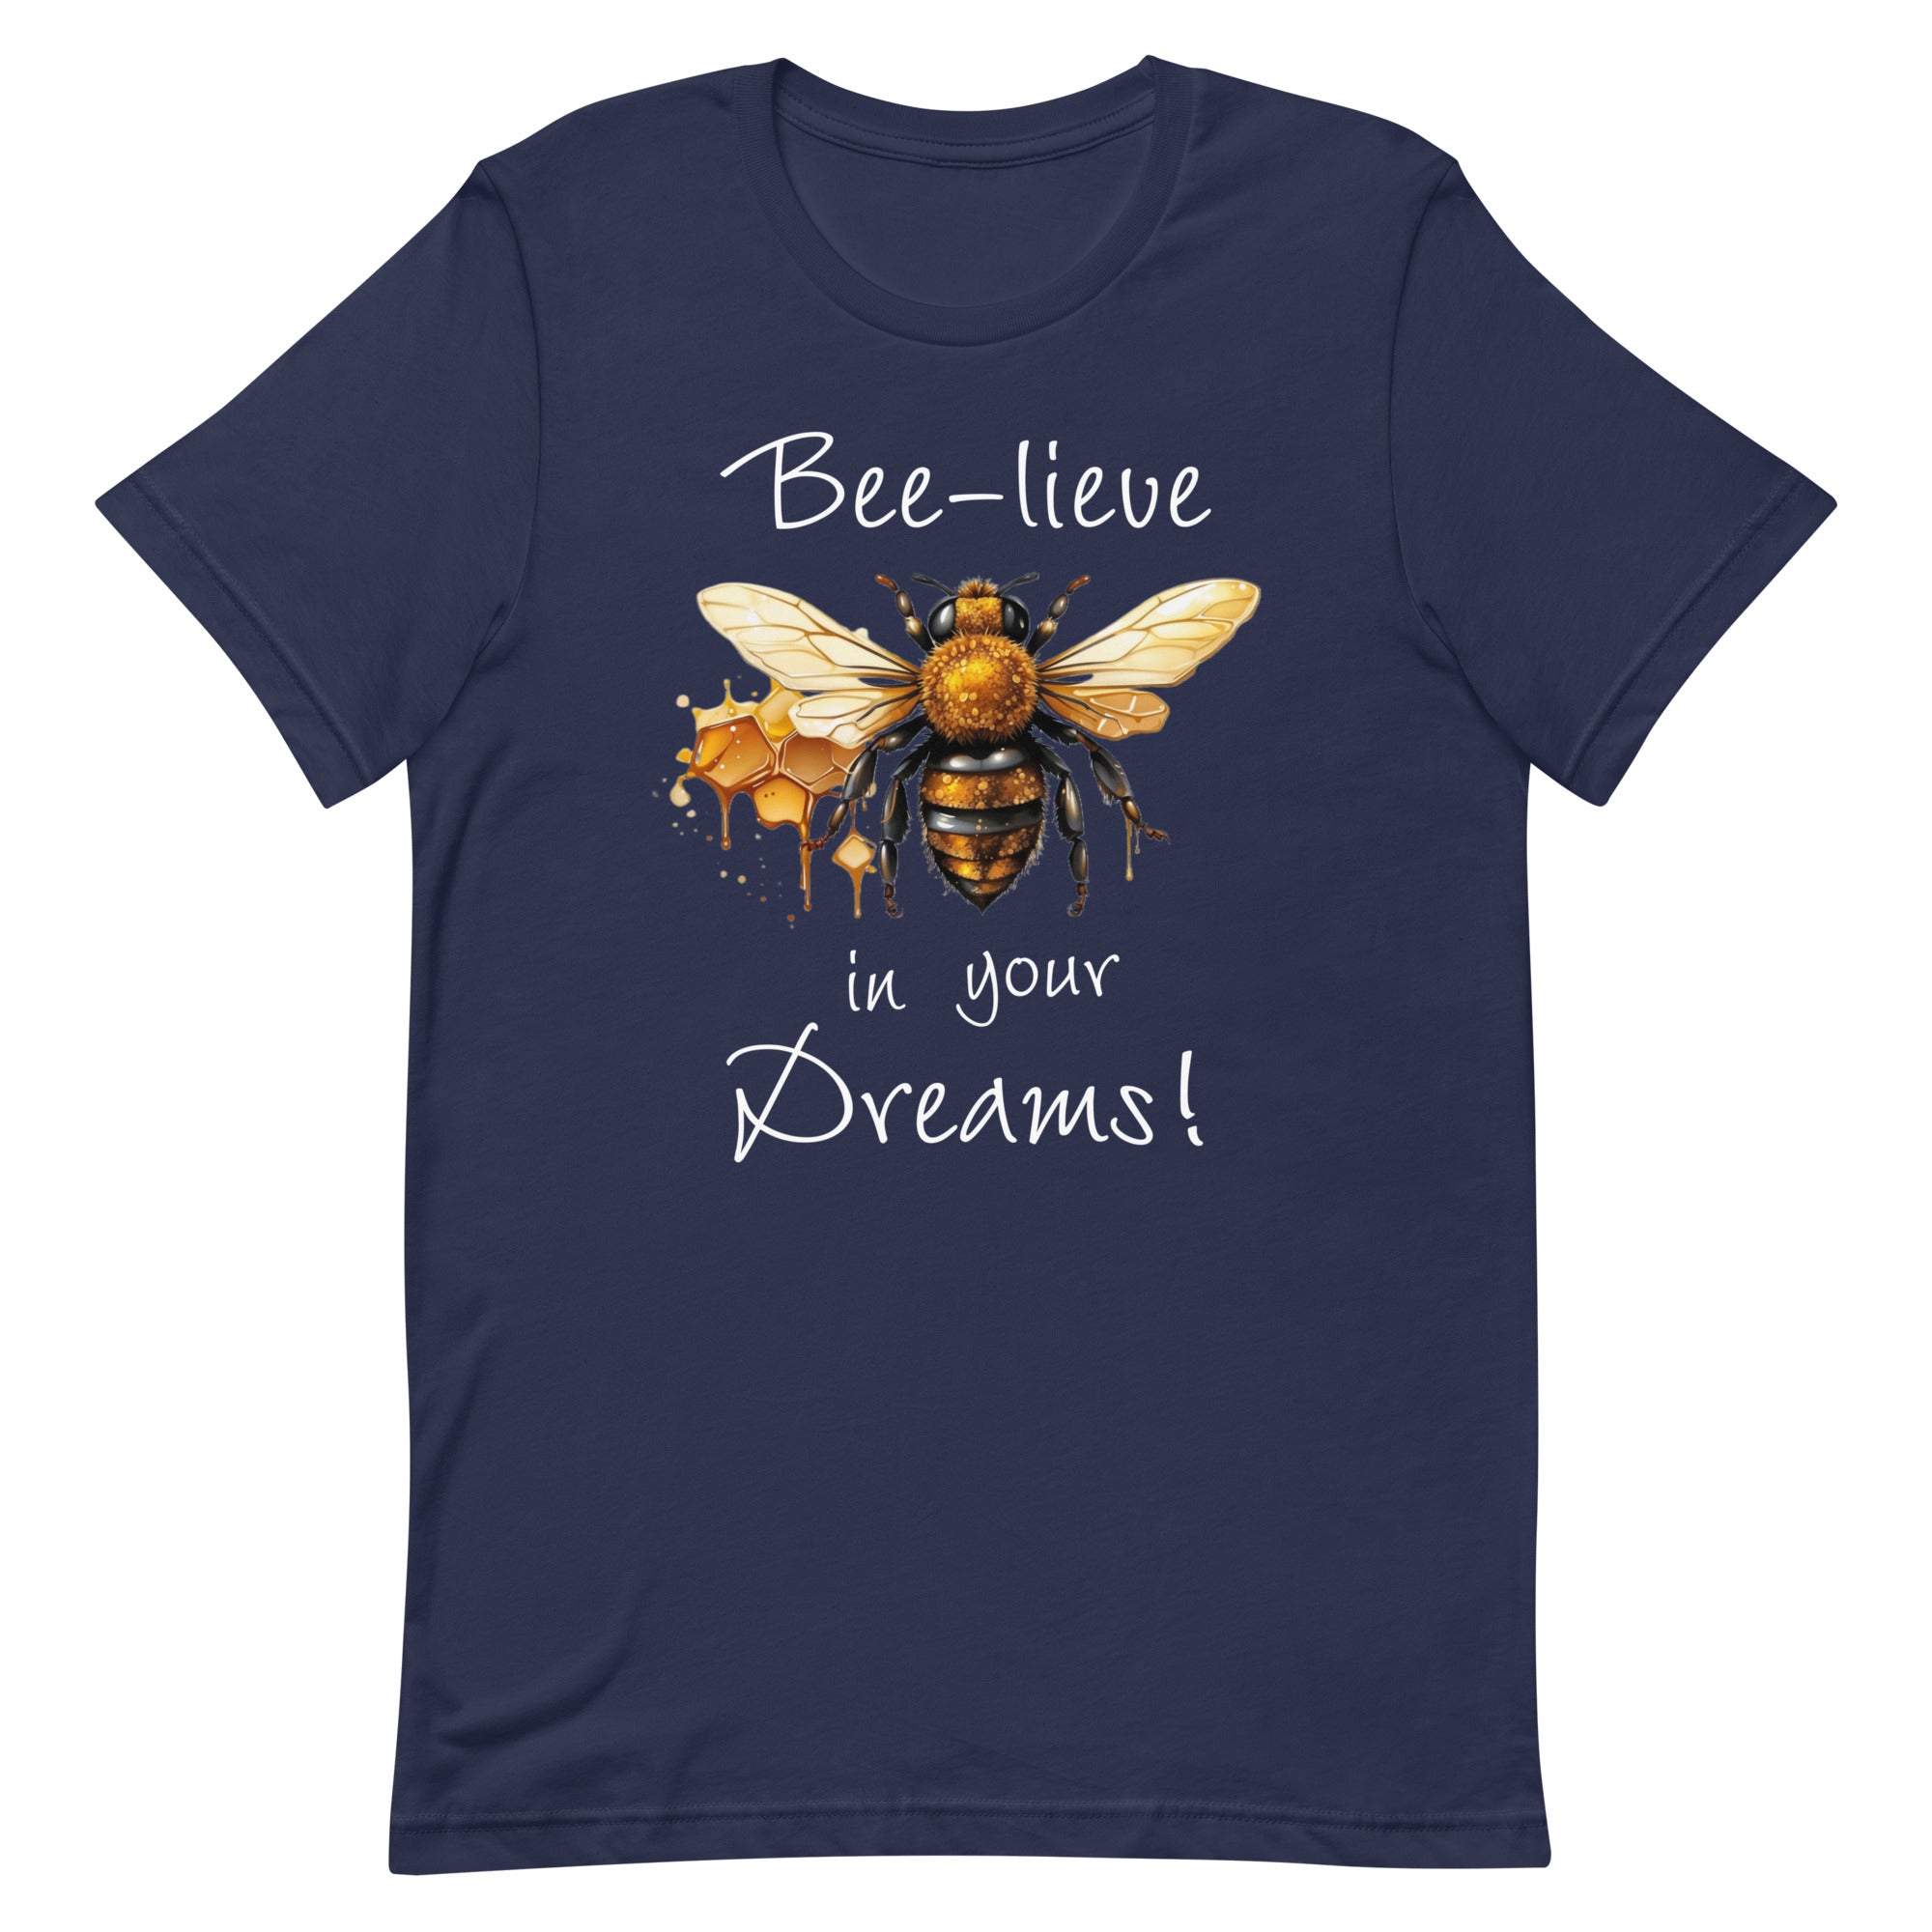 Bee-lieve in Your Dreams T-Shirt, Gift for Bee Lovers Navy S L XL M DenBox